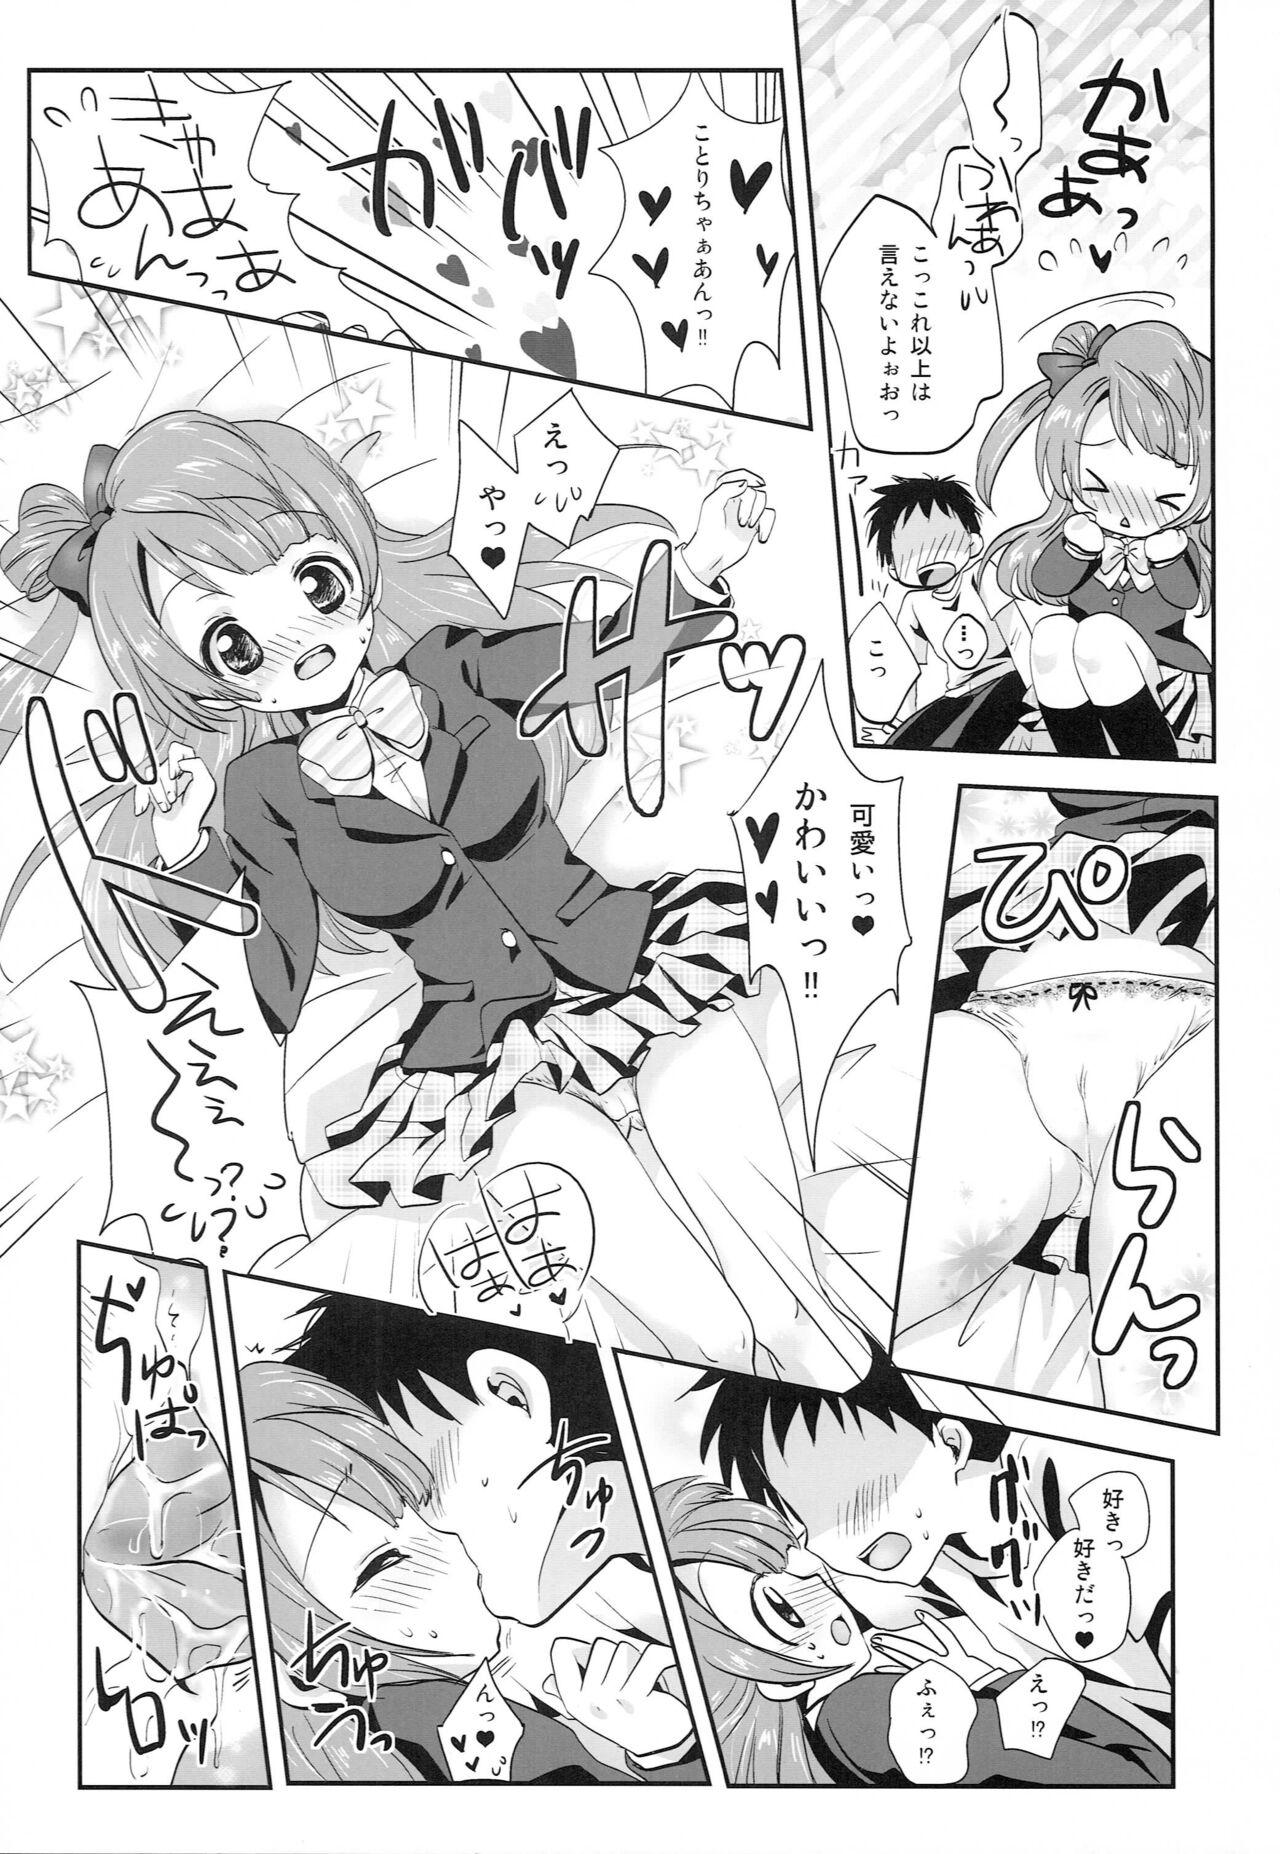 Party KOTORI DREAMING! - Love live Throat - Page 7